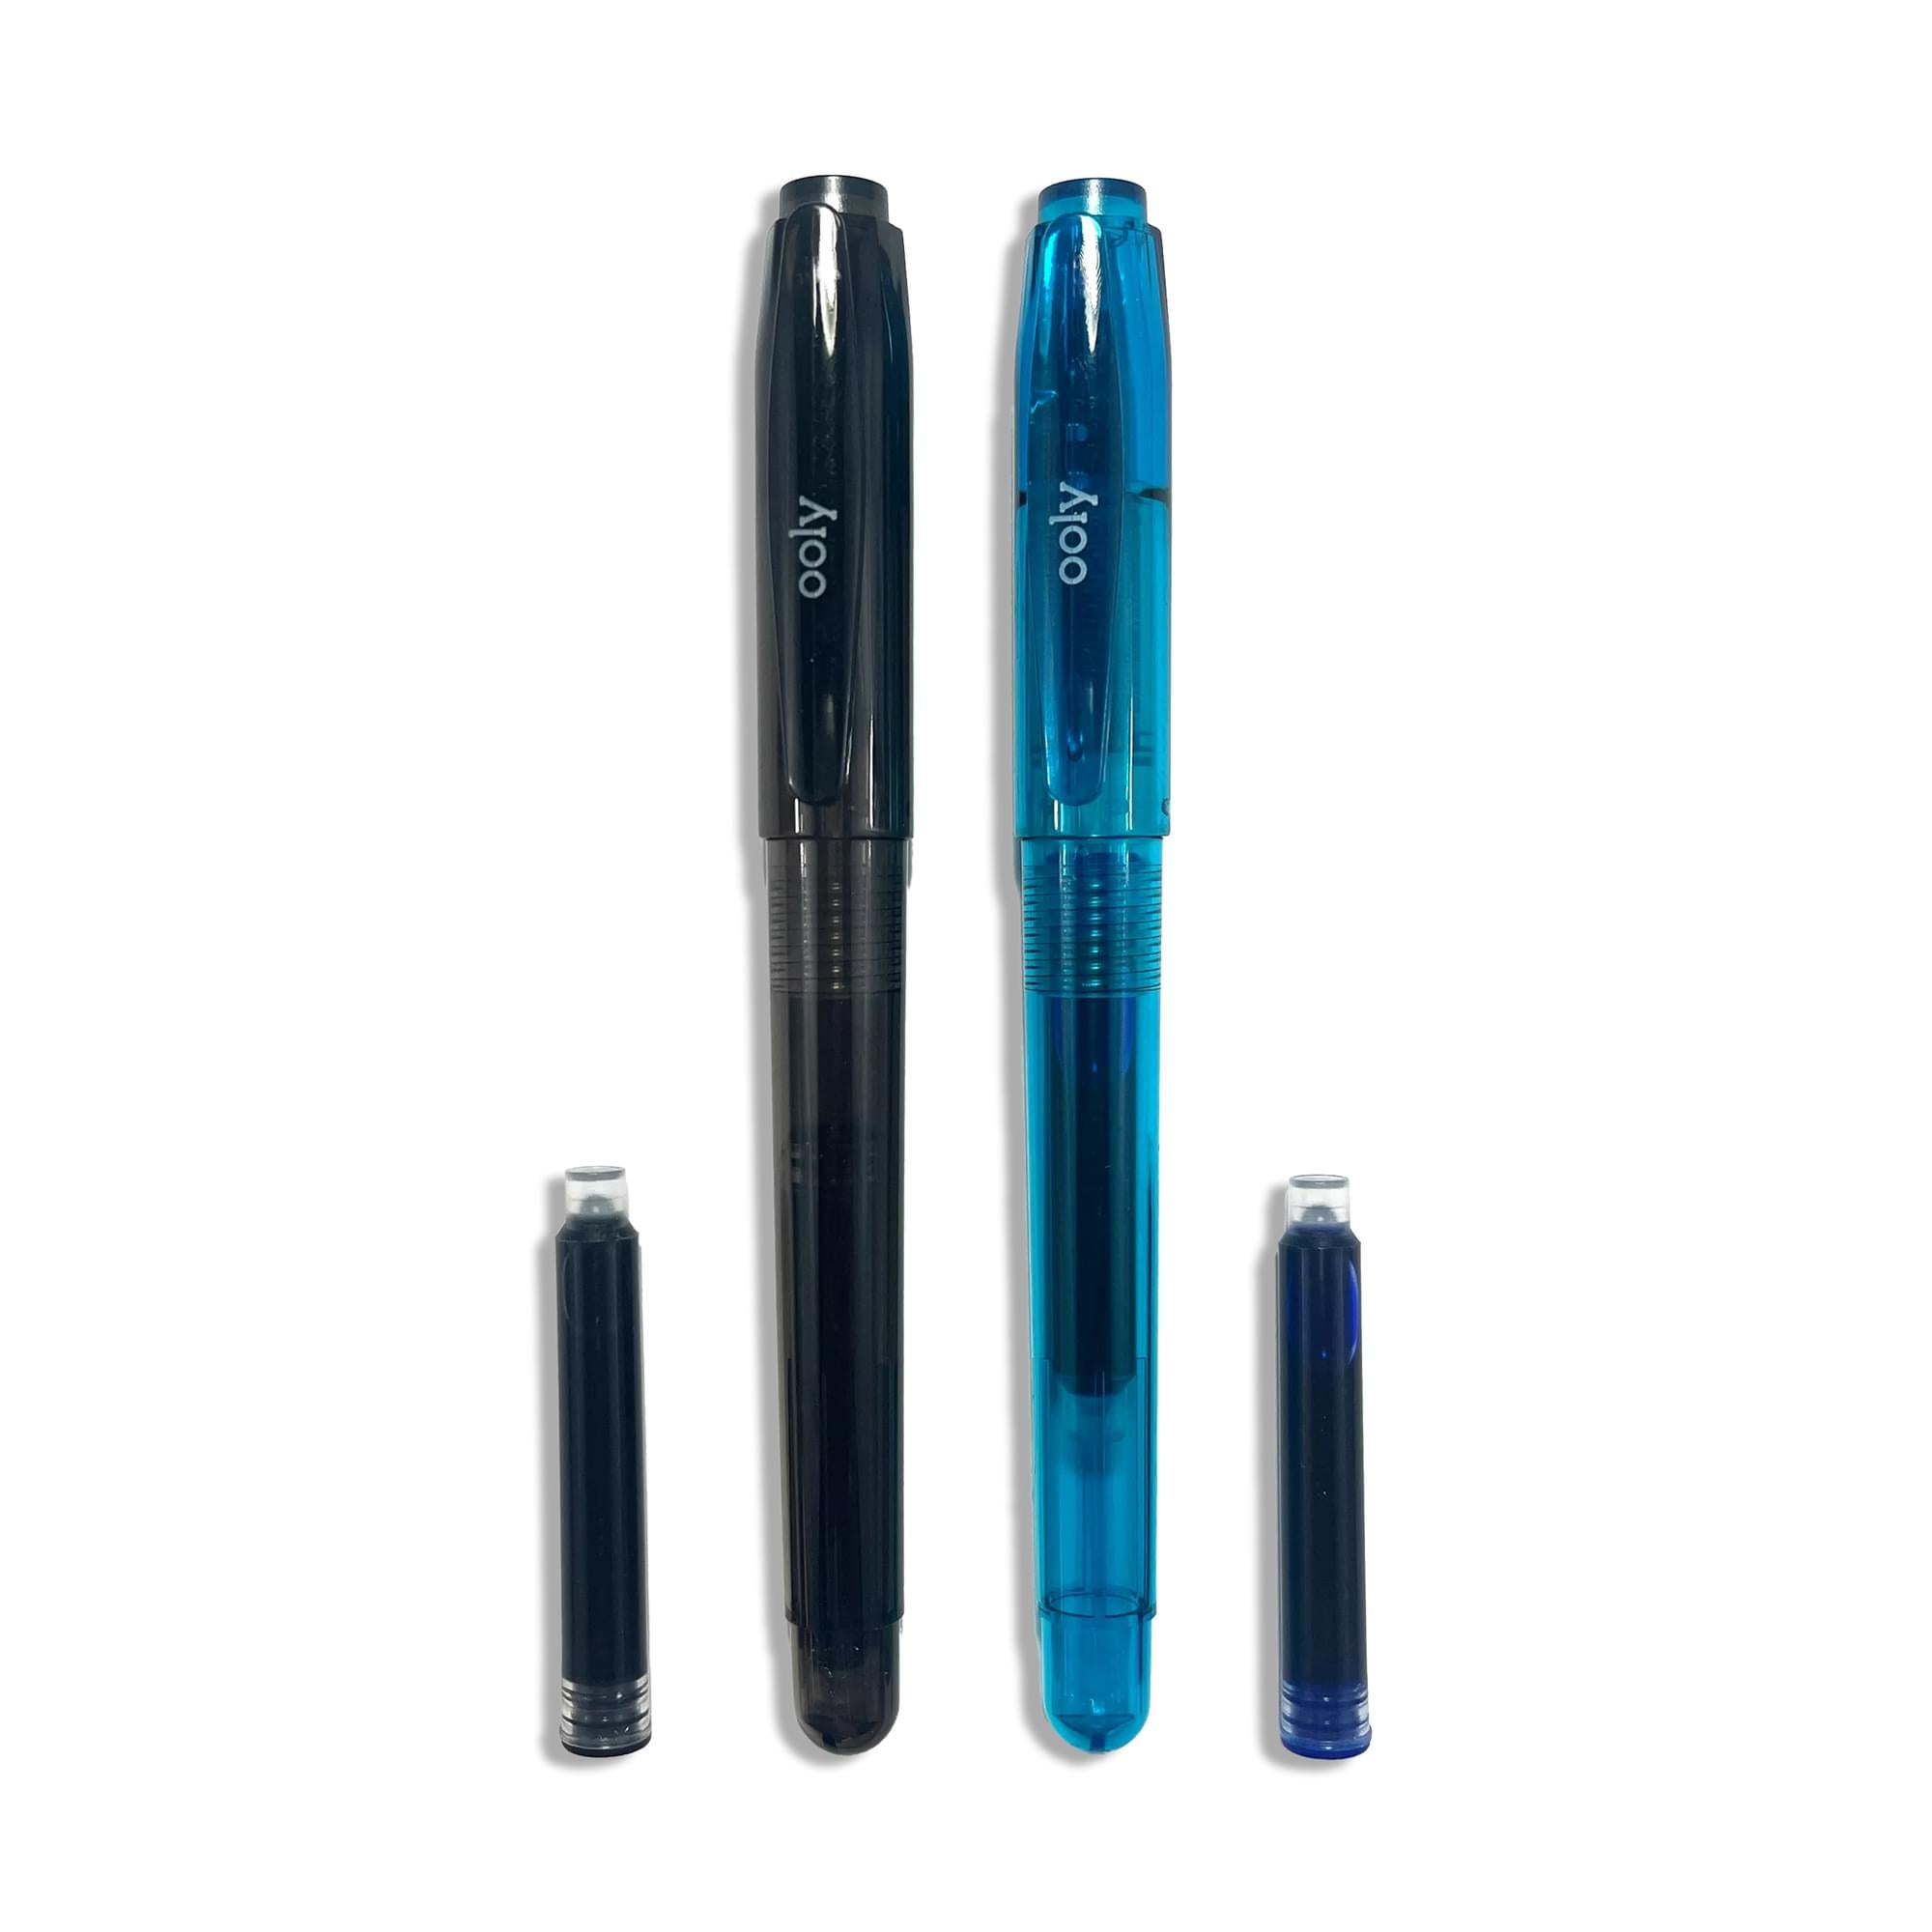 Both blue and black ink OOLY Splendid fountain pen tips with refills